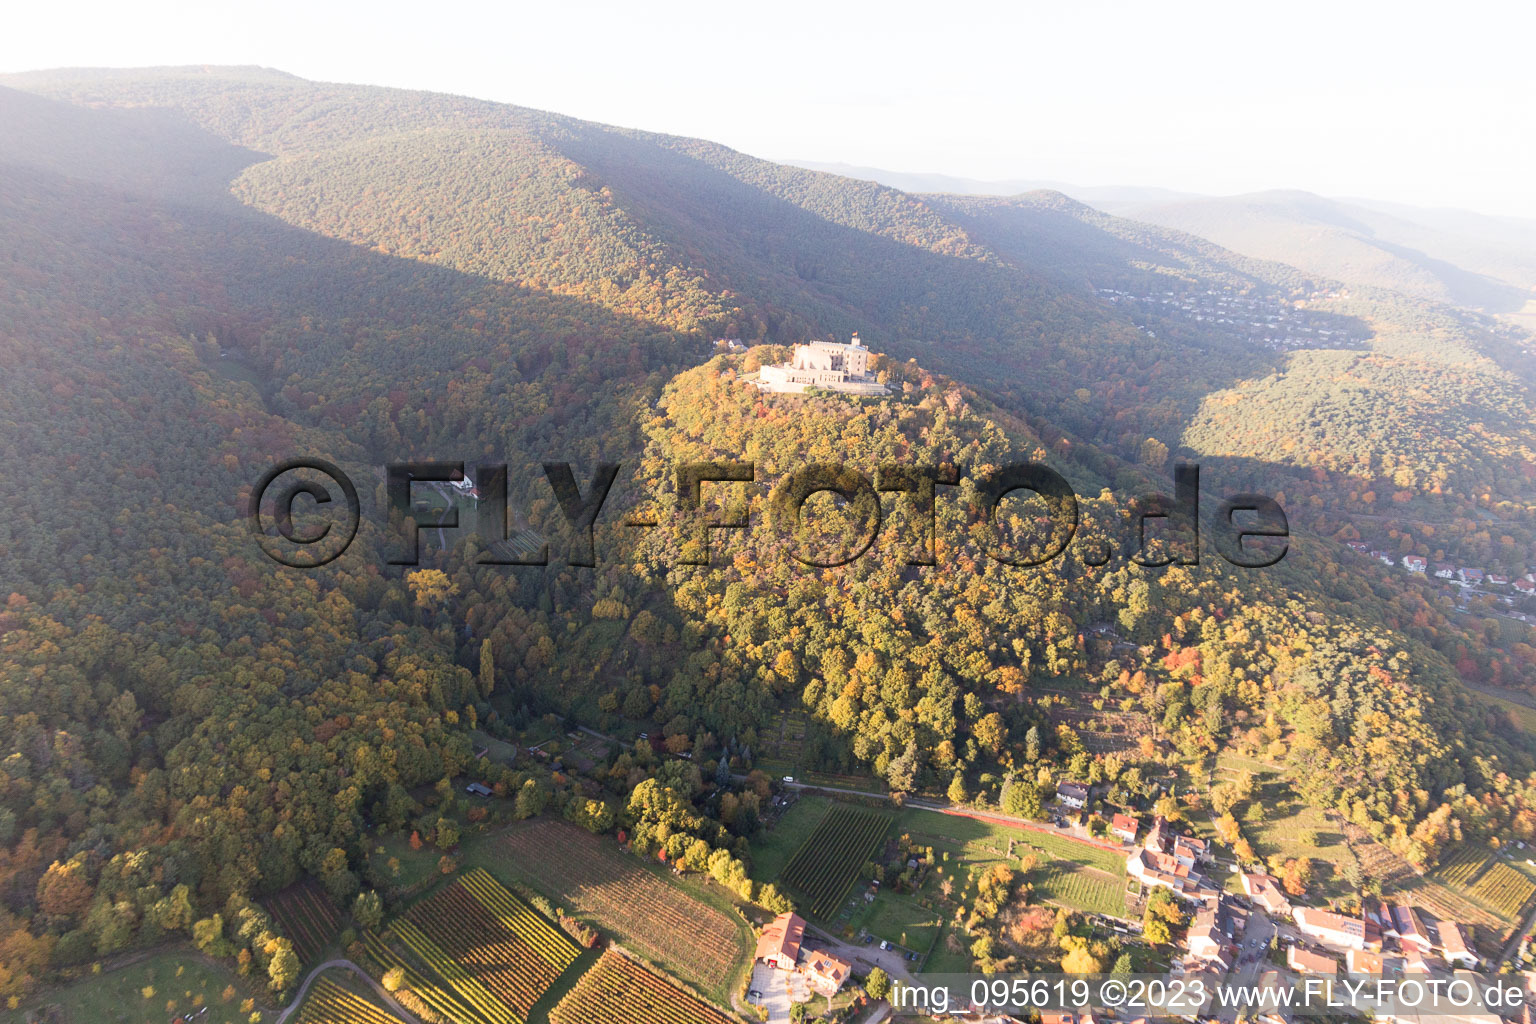 Hambach Castle in the district Diedesfeld in Neustadt an der Weinstraße in the state Rhineland-Palatinate, Germany seen from a drone